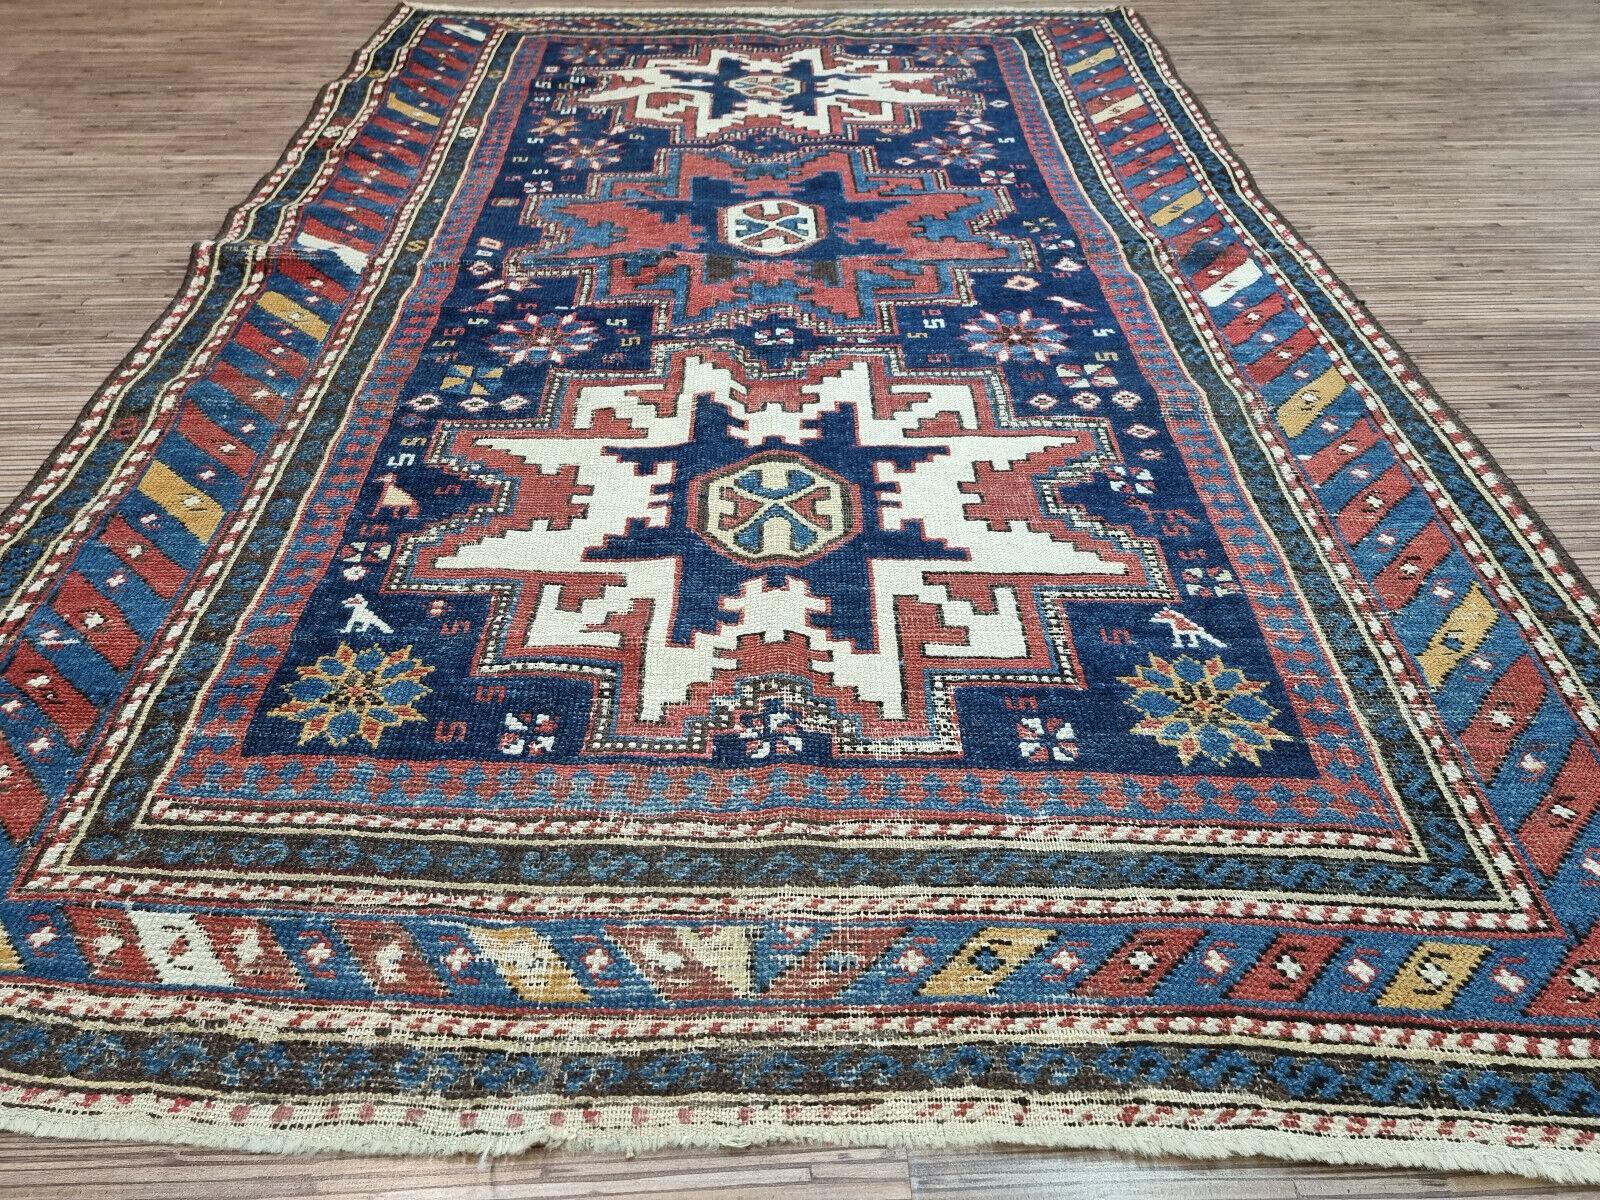 Handmade Antique Caucasian Shirvan Rug 3.4' x 5.2', 1900s - 1D89 In Good Condition For Sale In Bordeaux, FR